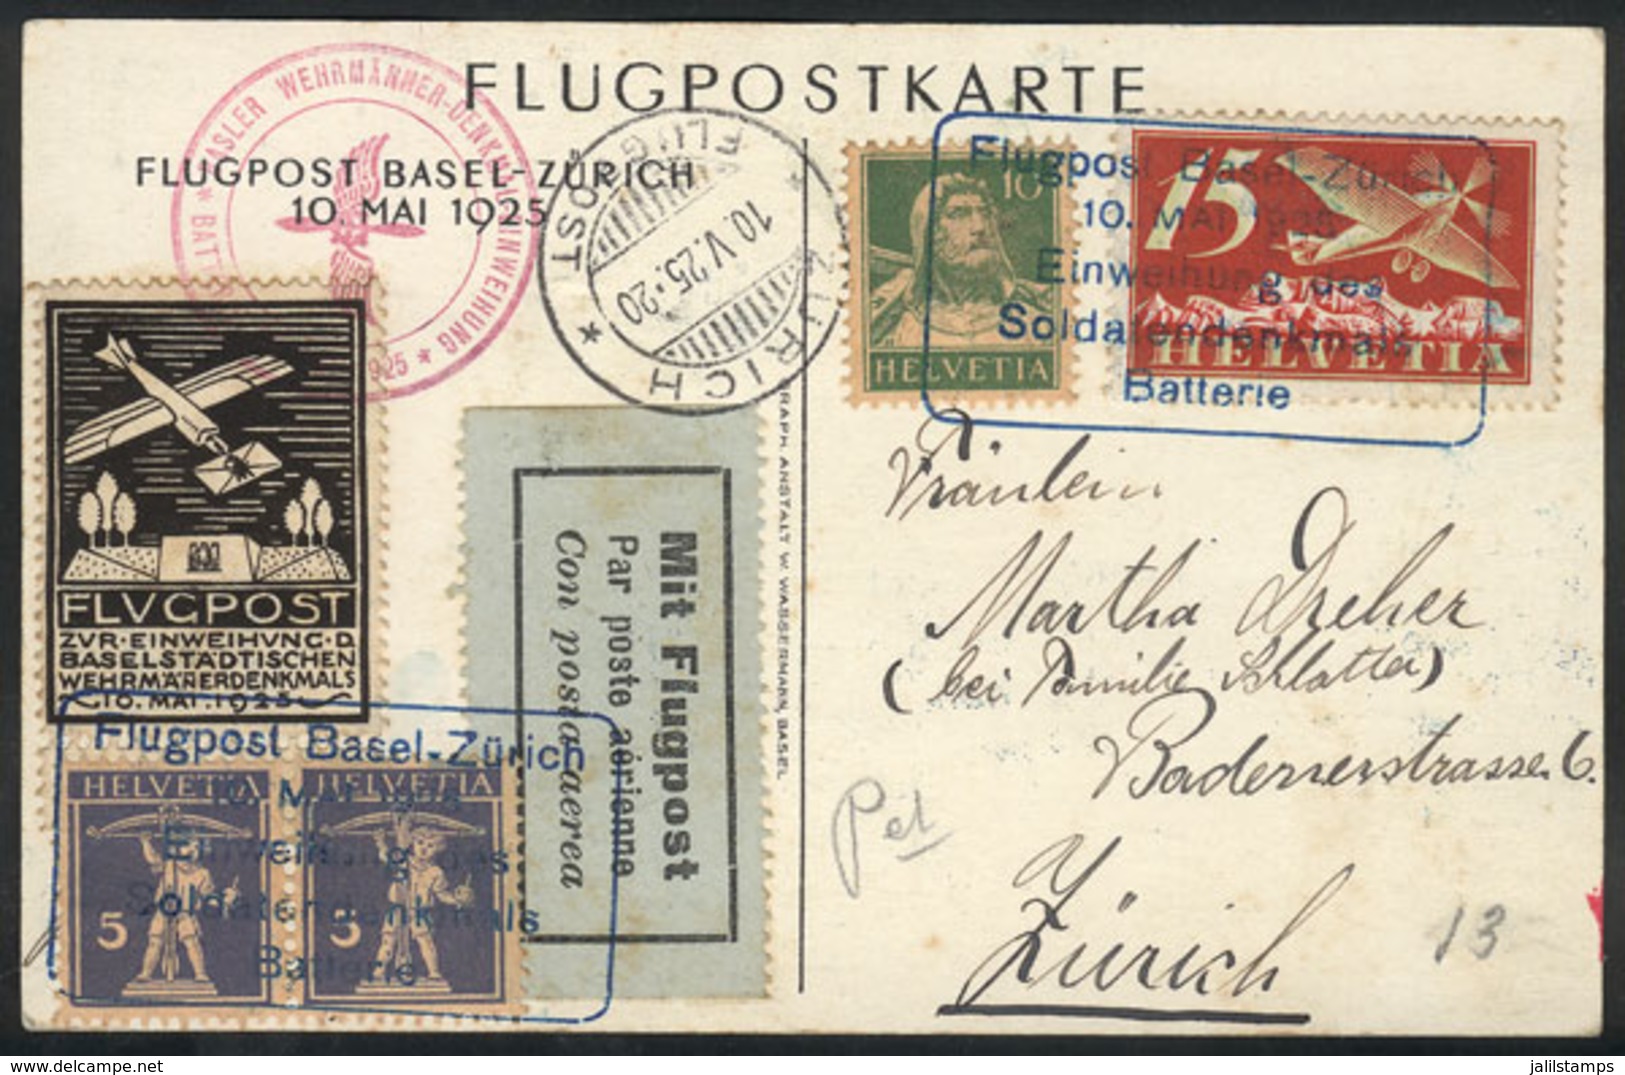 SWITZERLAND: 10/MAY/1925 Flight Basel - Zürich, Postcard With Cinderella And Special Cancels, VF Quality! - Briefe U. Dokumente